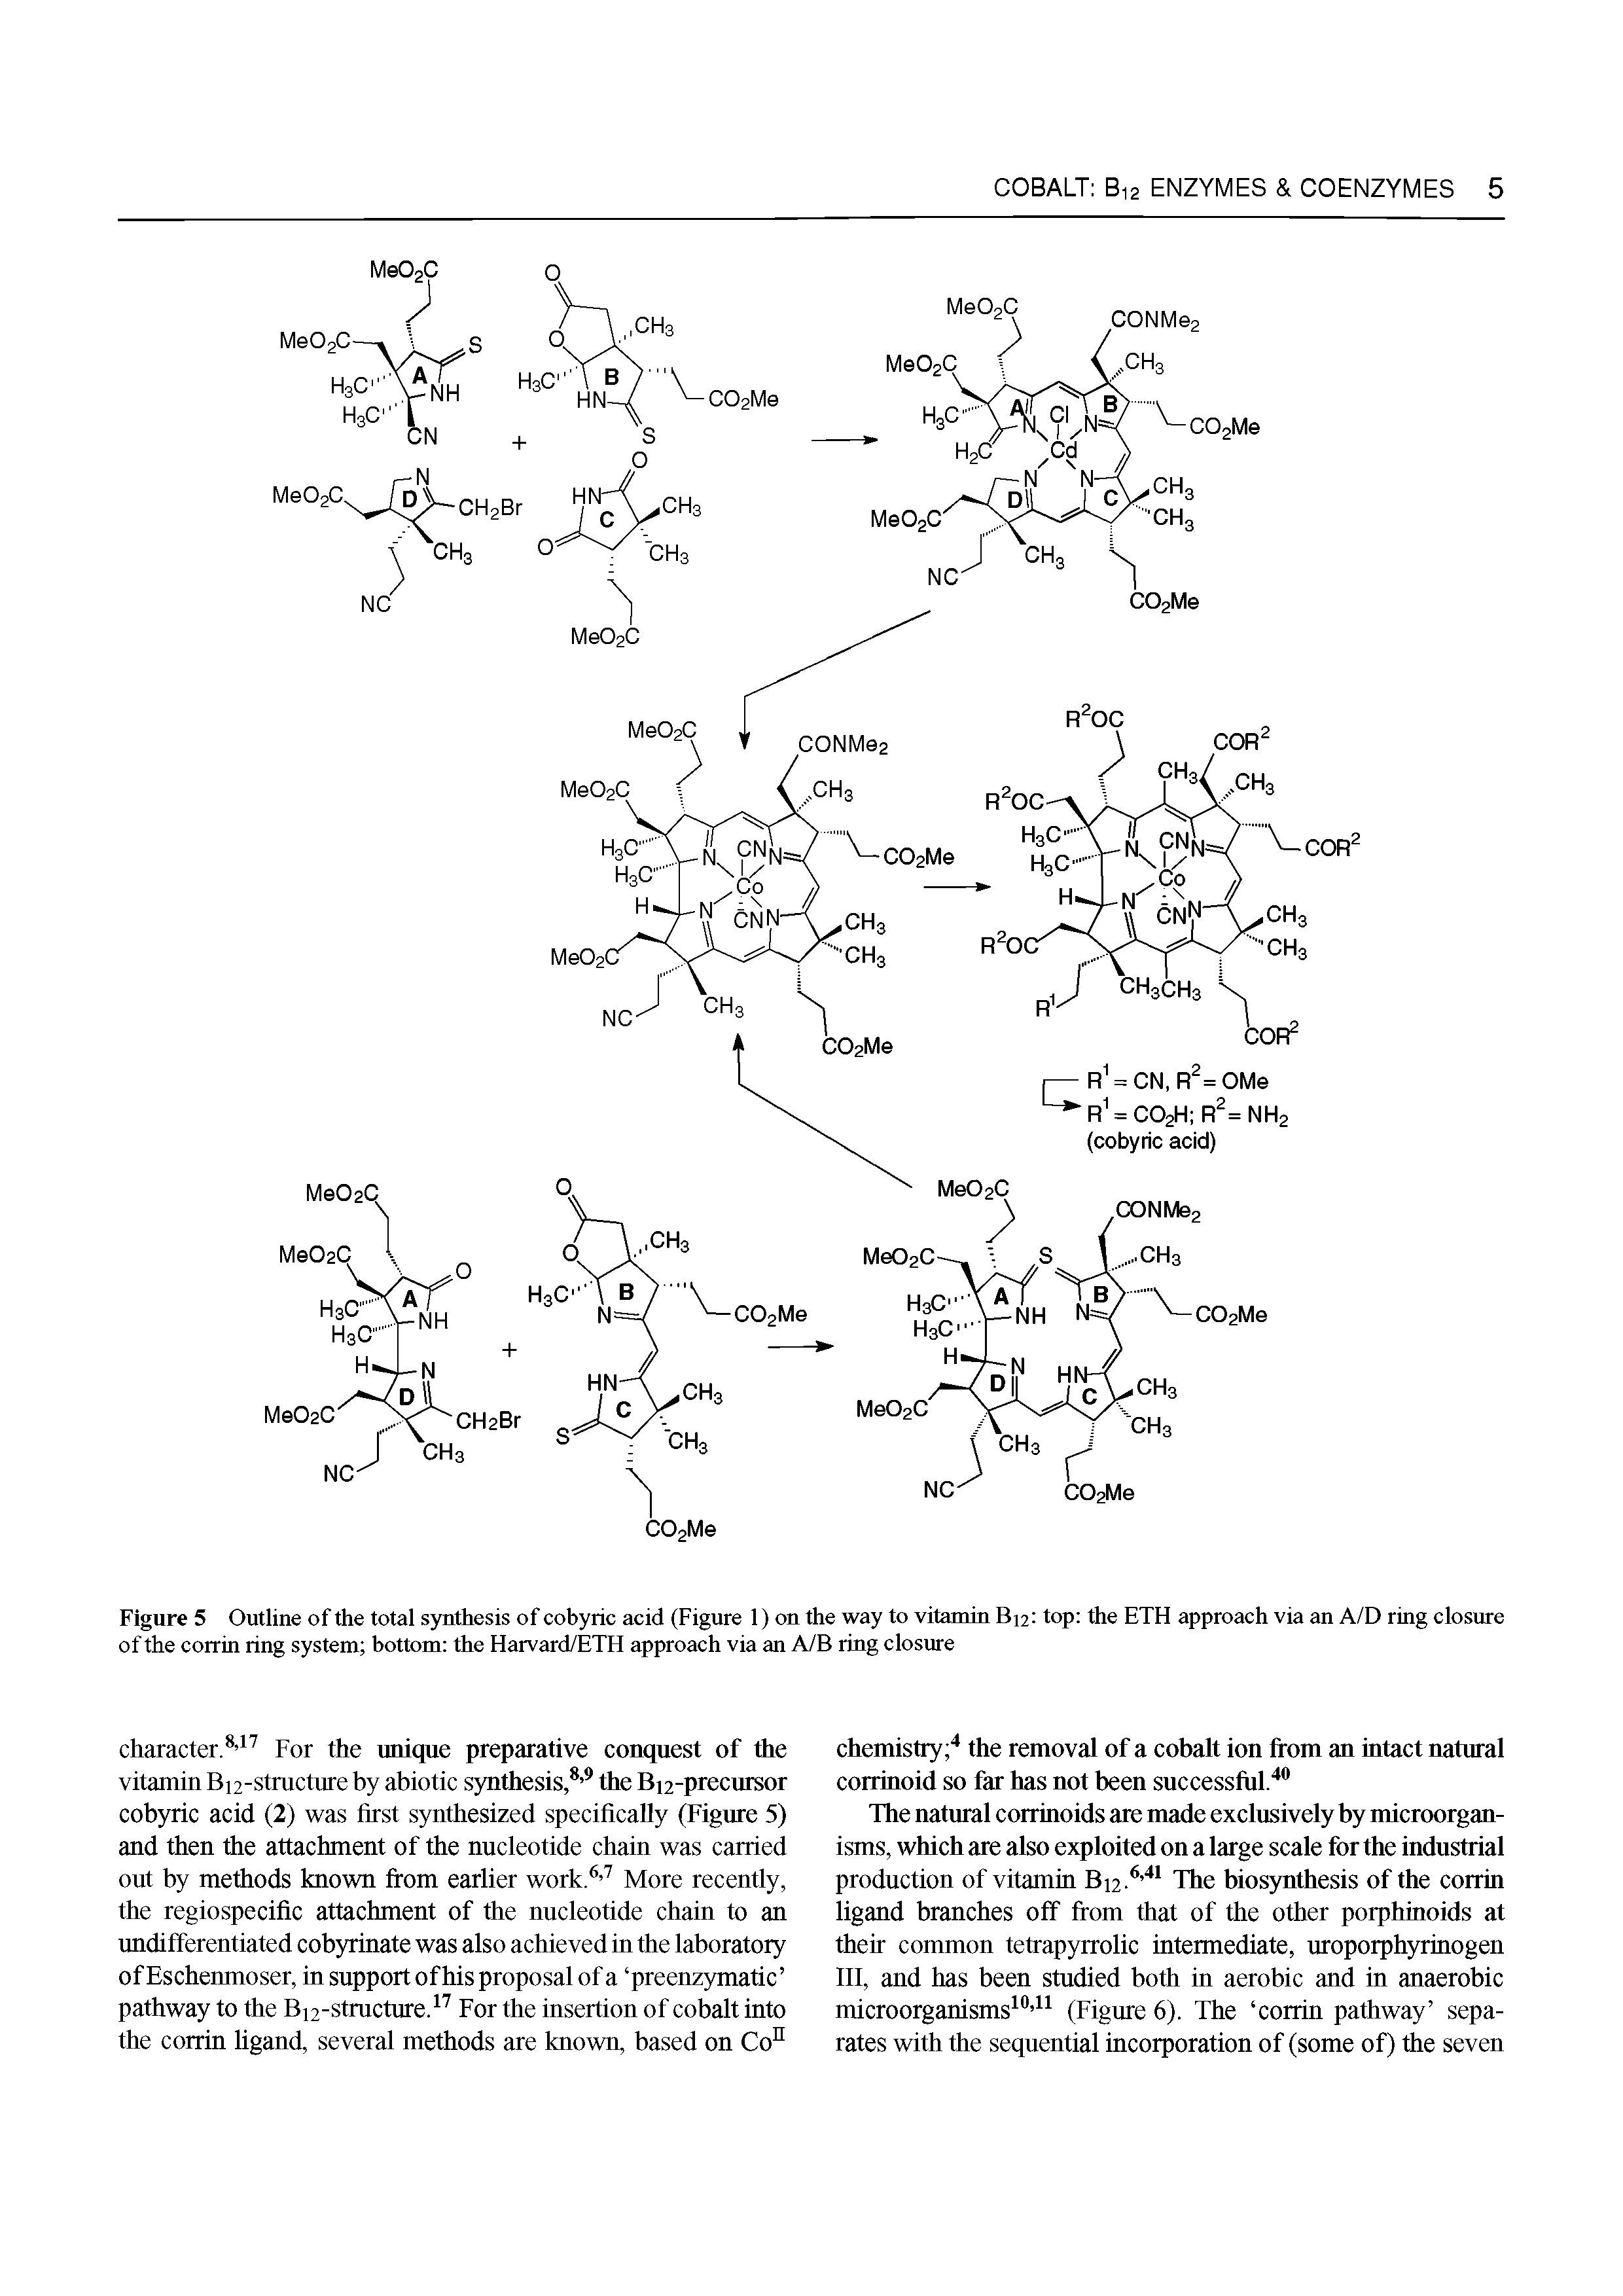 Figure 5 Outline of the total synthesis of cobyric acid (Figure 1) on the way to vitamin B12 top the ETH approach via an A/D ring closure of the corrin ring system bottom the Harvard/ETH approach via an A/B ring closure...